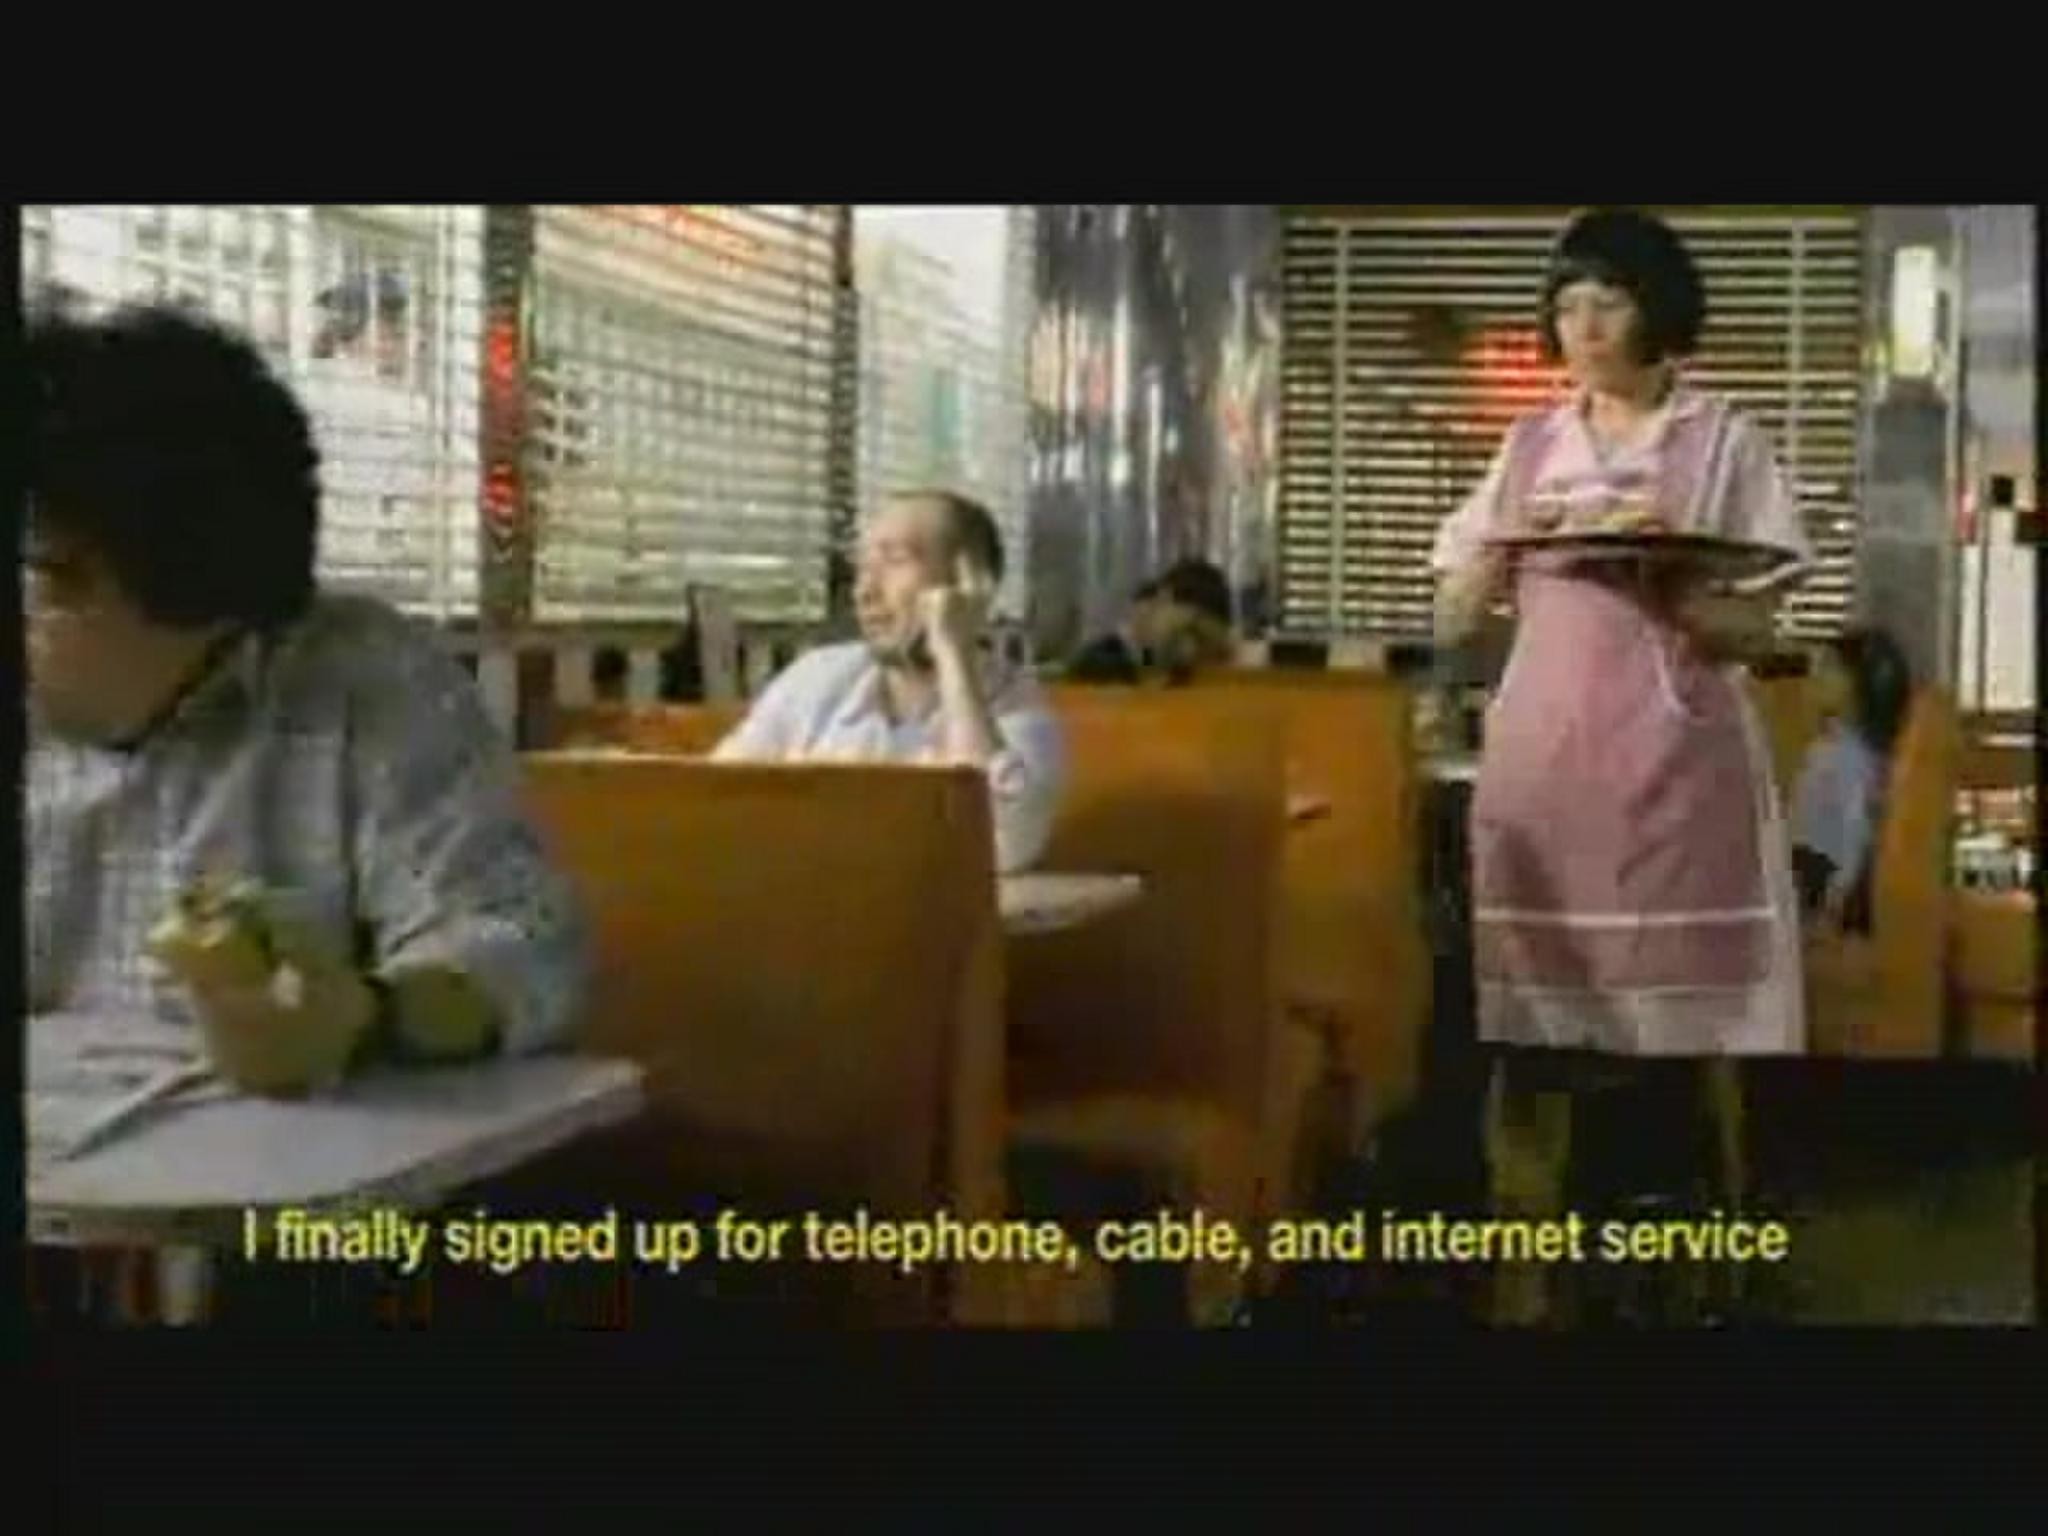 CABLE, INTERNET & PHONE SERVICE